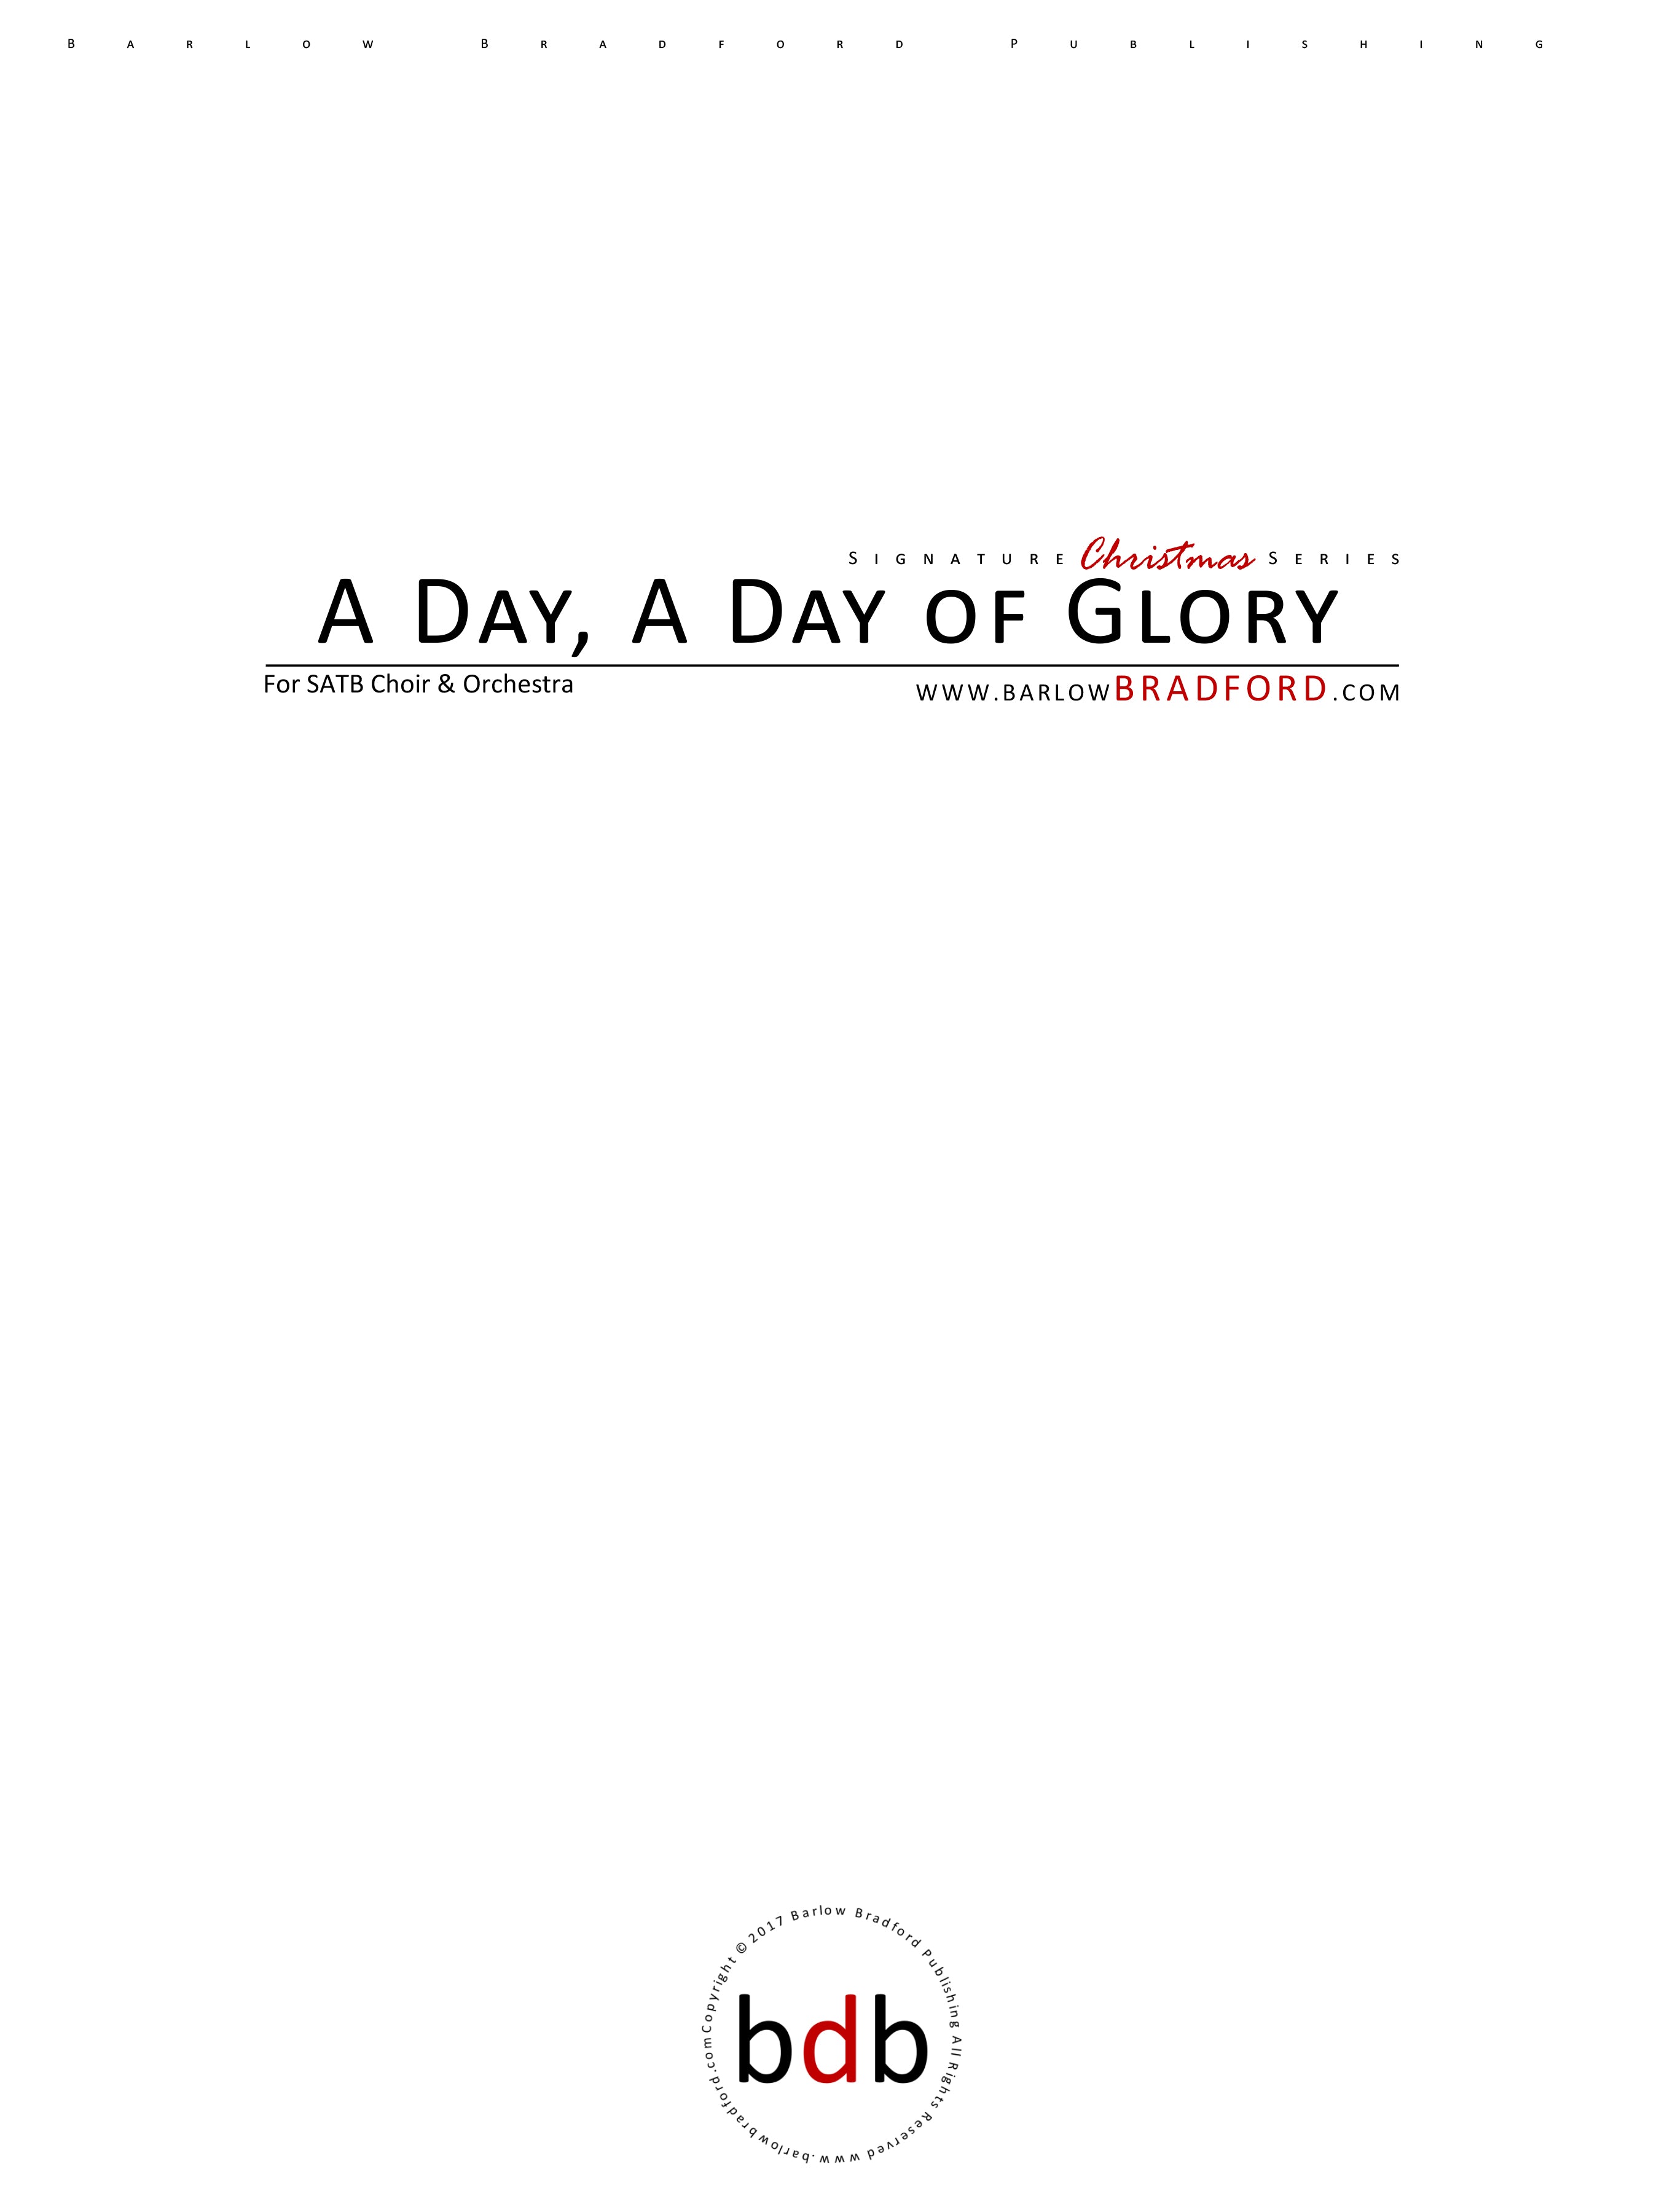 A Day, A Day of Glory